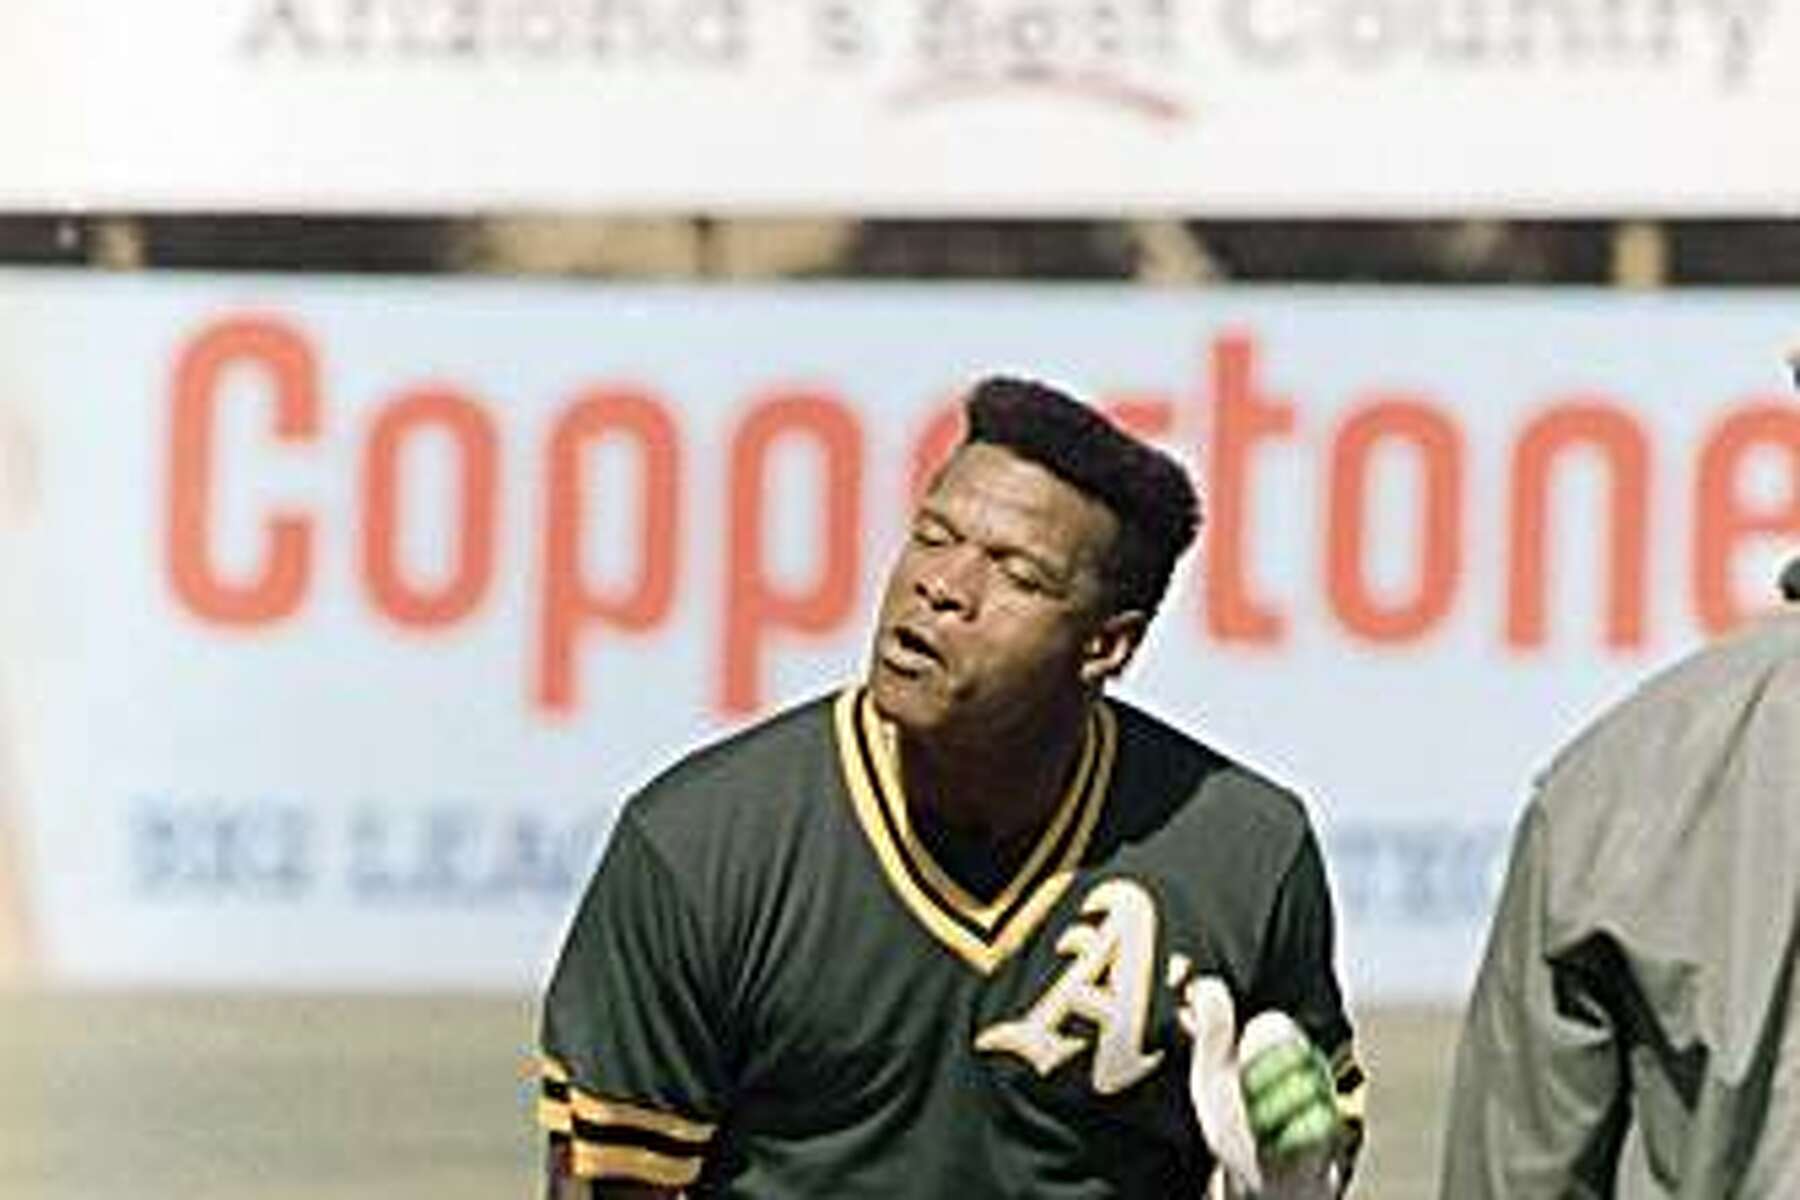 Rickey Henderson has come through Las Vegas for many yearsas a MLB  Player and a Coach. He's been great during each visit. #tbt